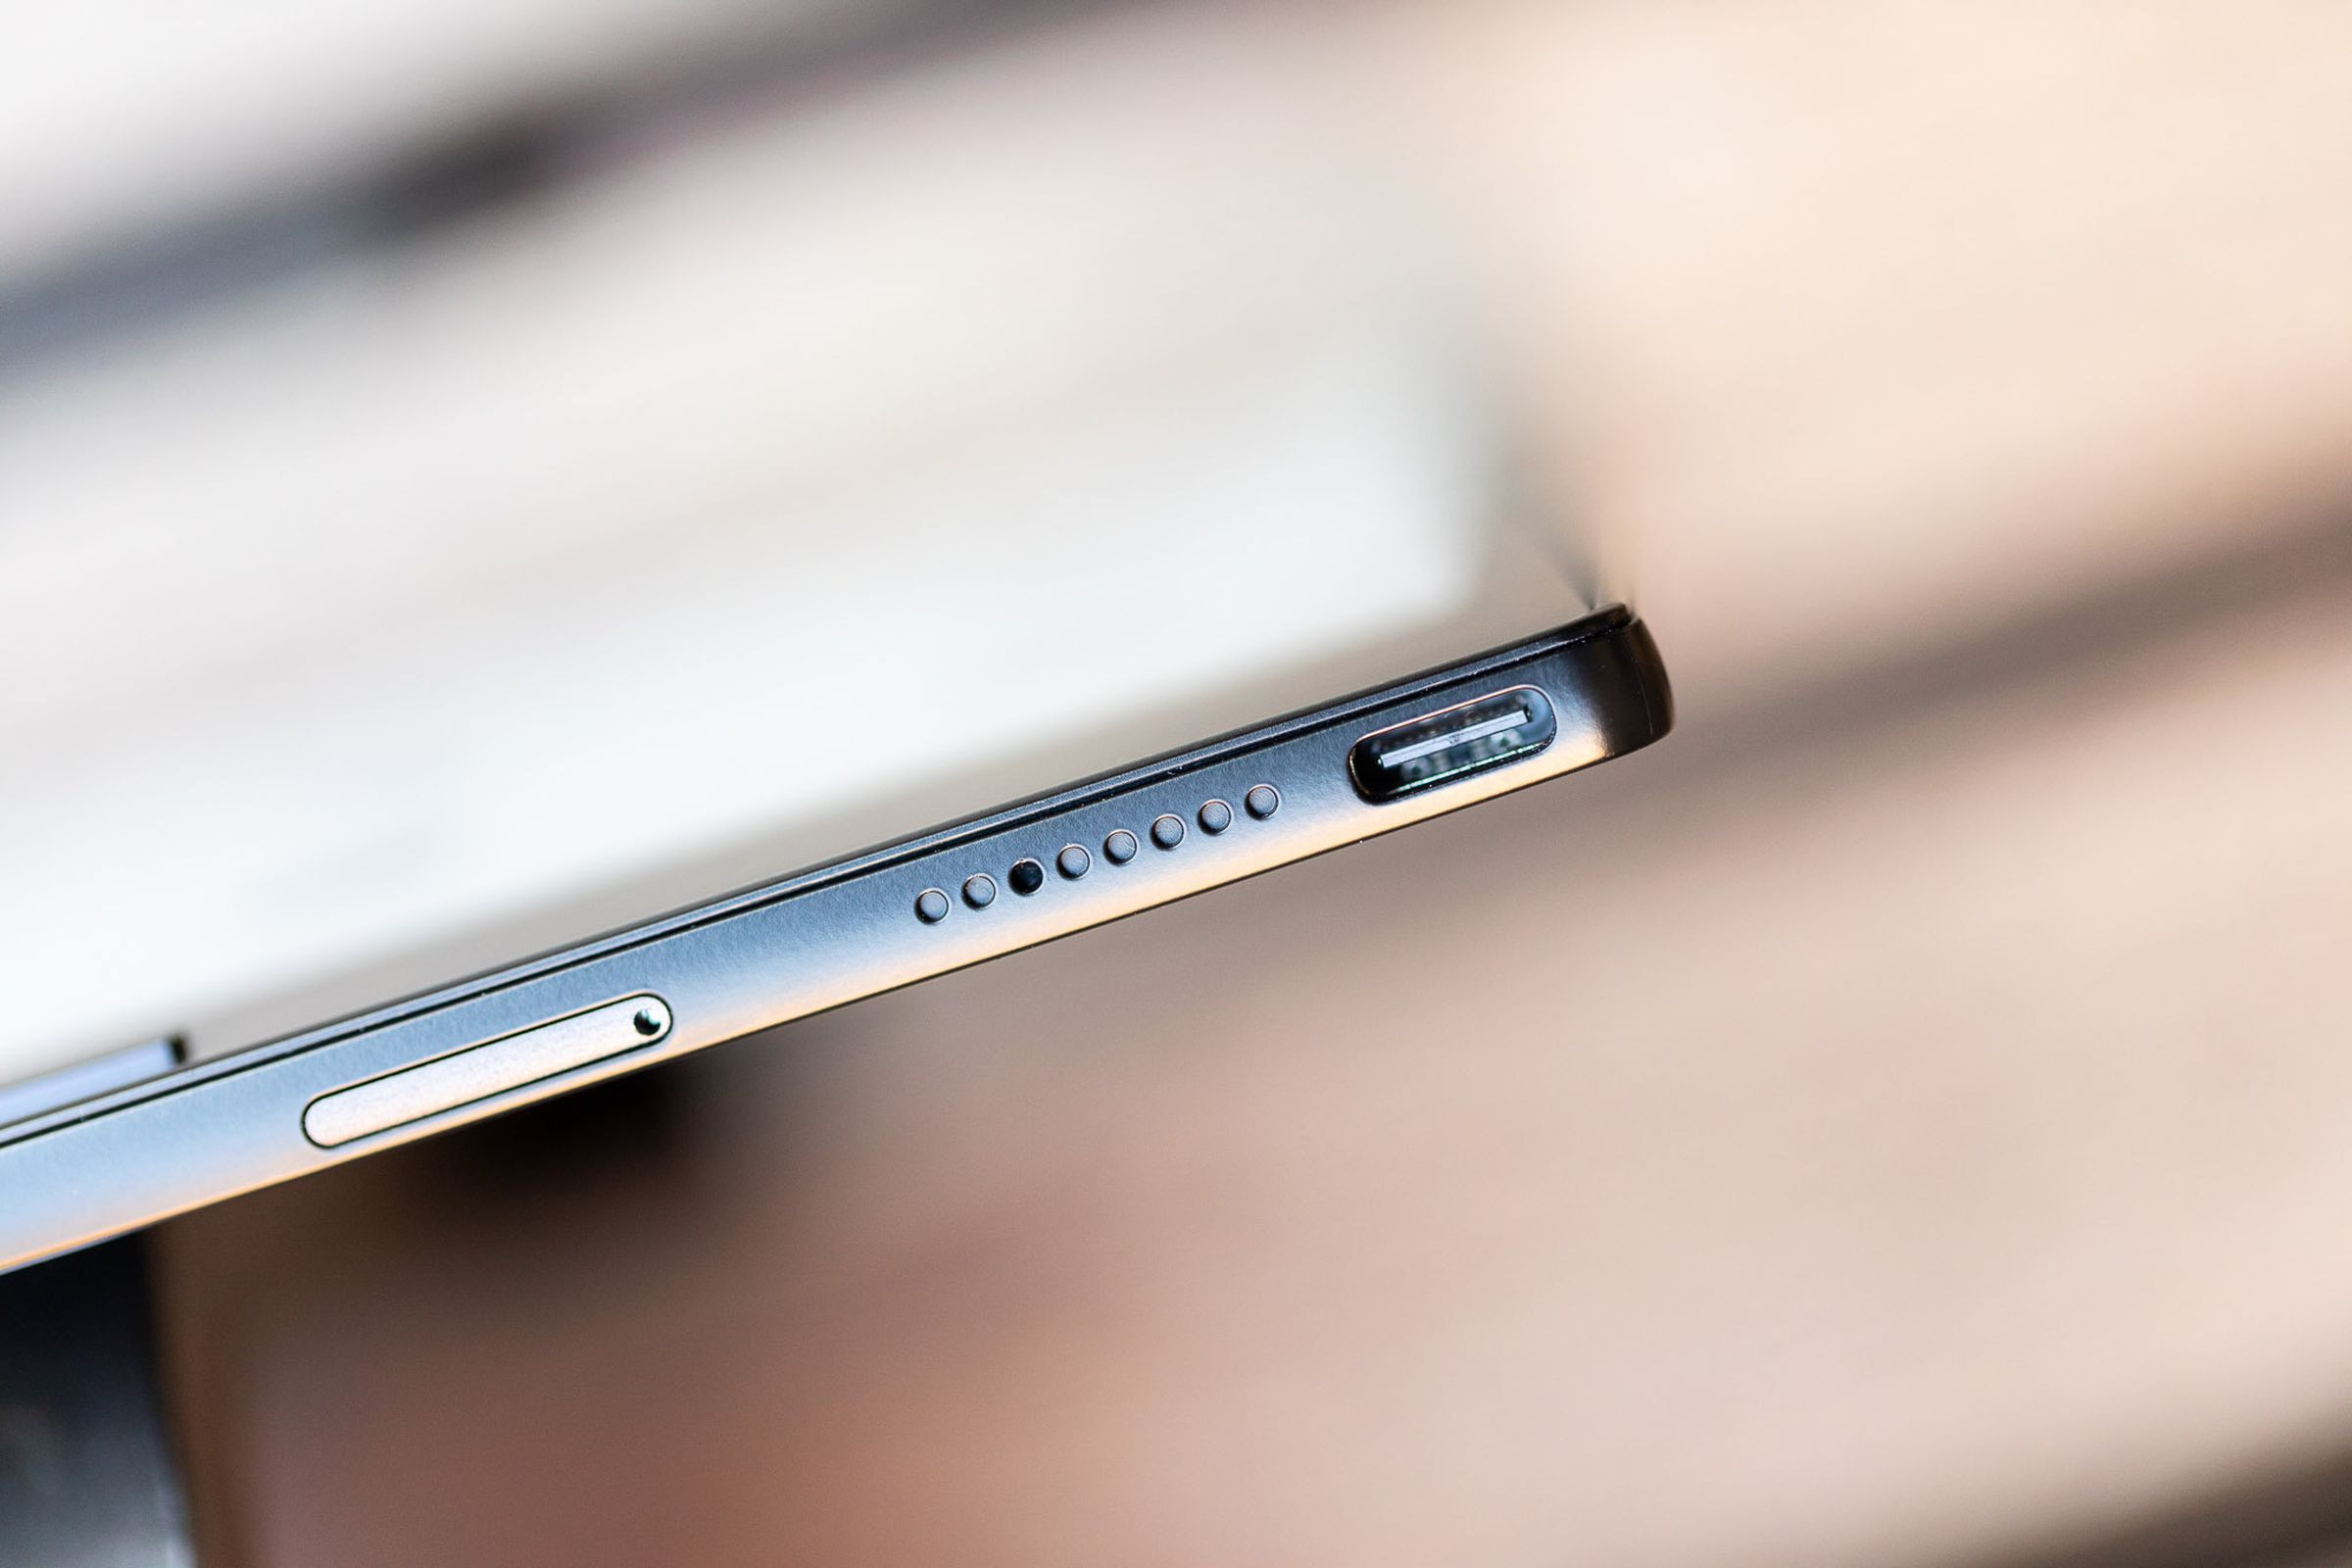 A close-up view of the microSD card slot, speaker, and USB-C port.